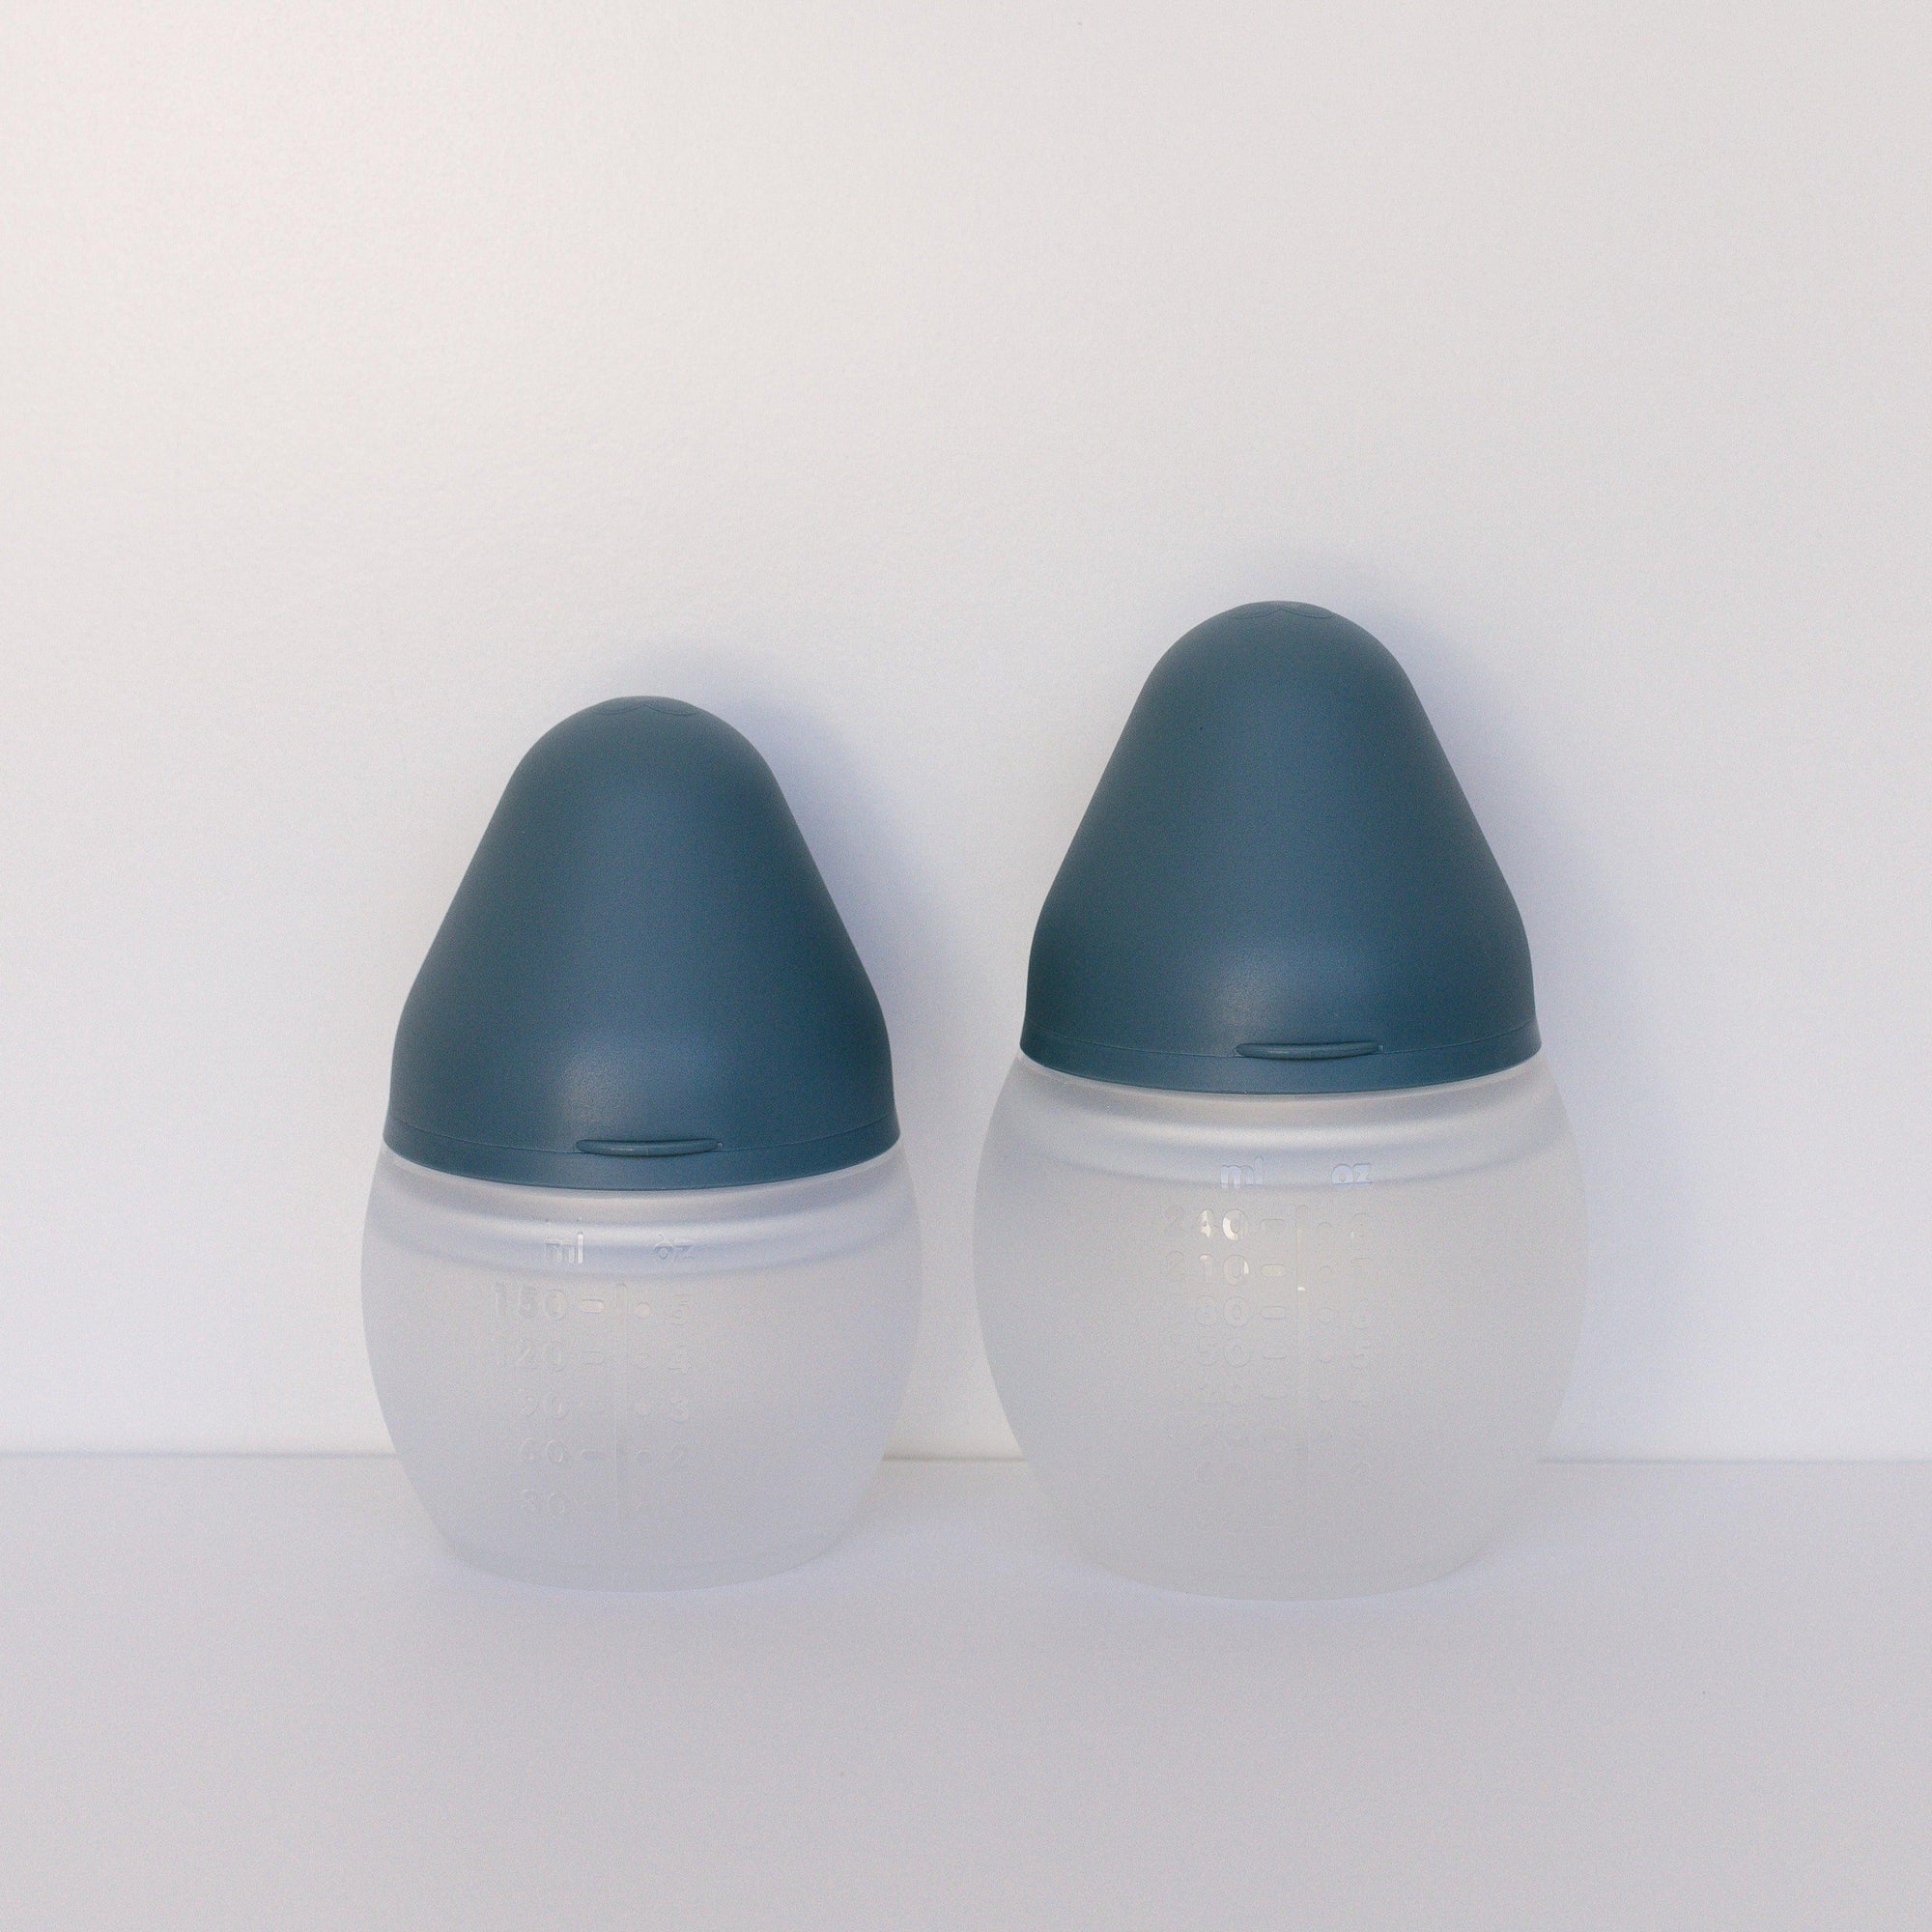 Two BibRond blue grey baby bottles by Elhée France sitting on a white surface.